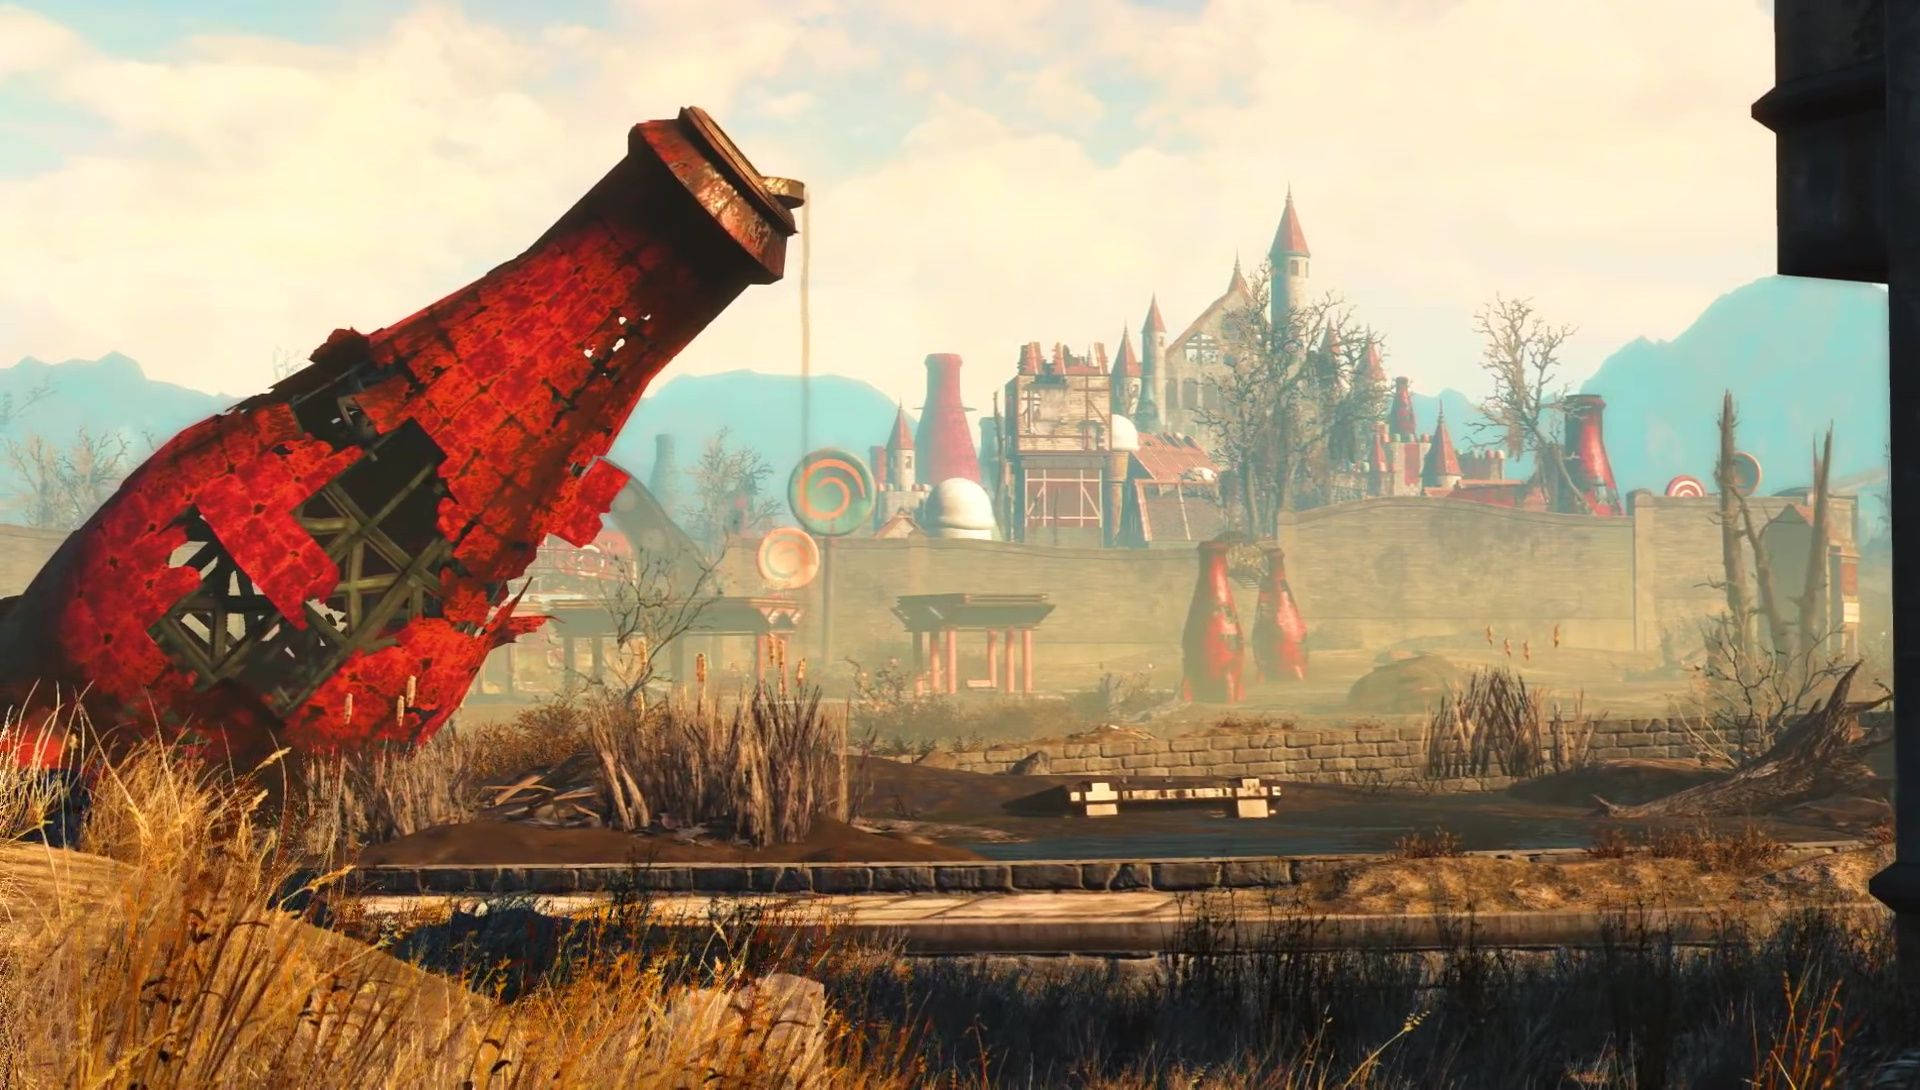 Explore the Post-Apocalyptic Park of Nuka World in Fallout 4 Wallpaper